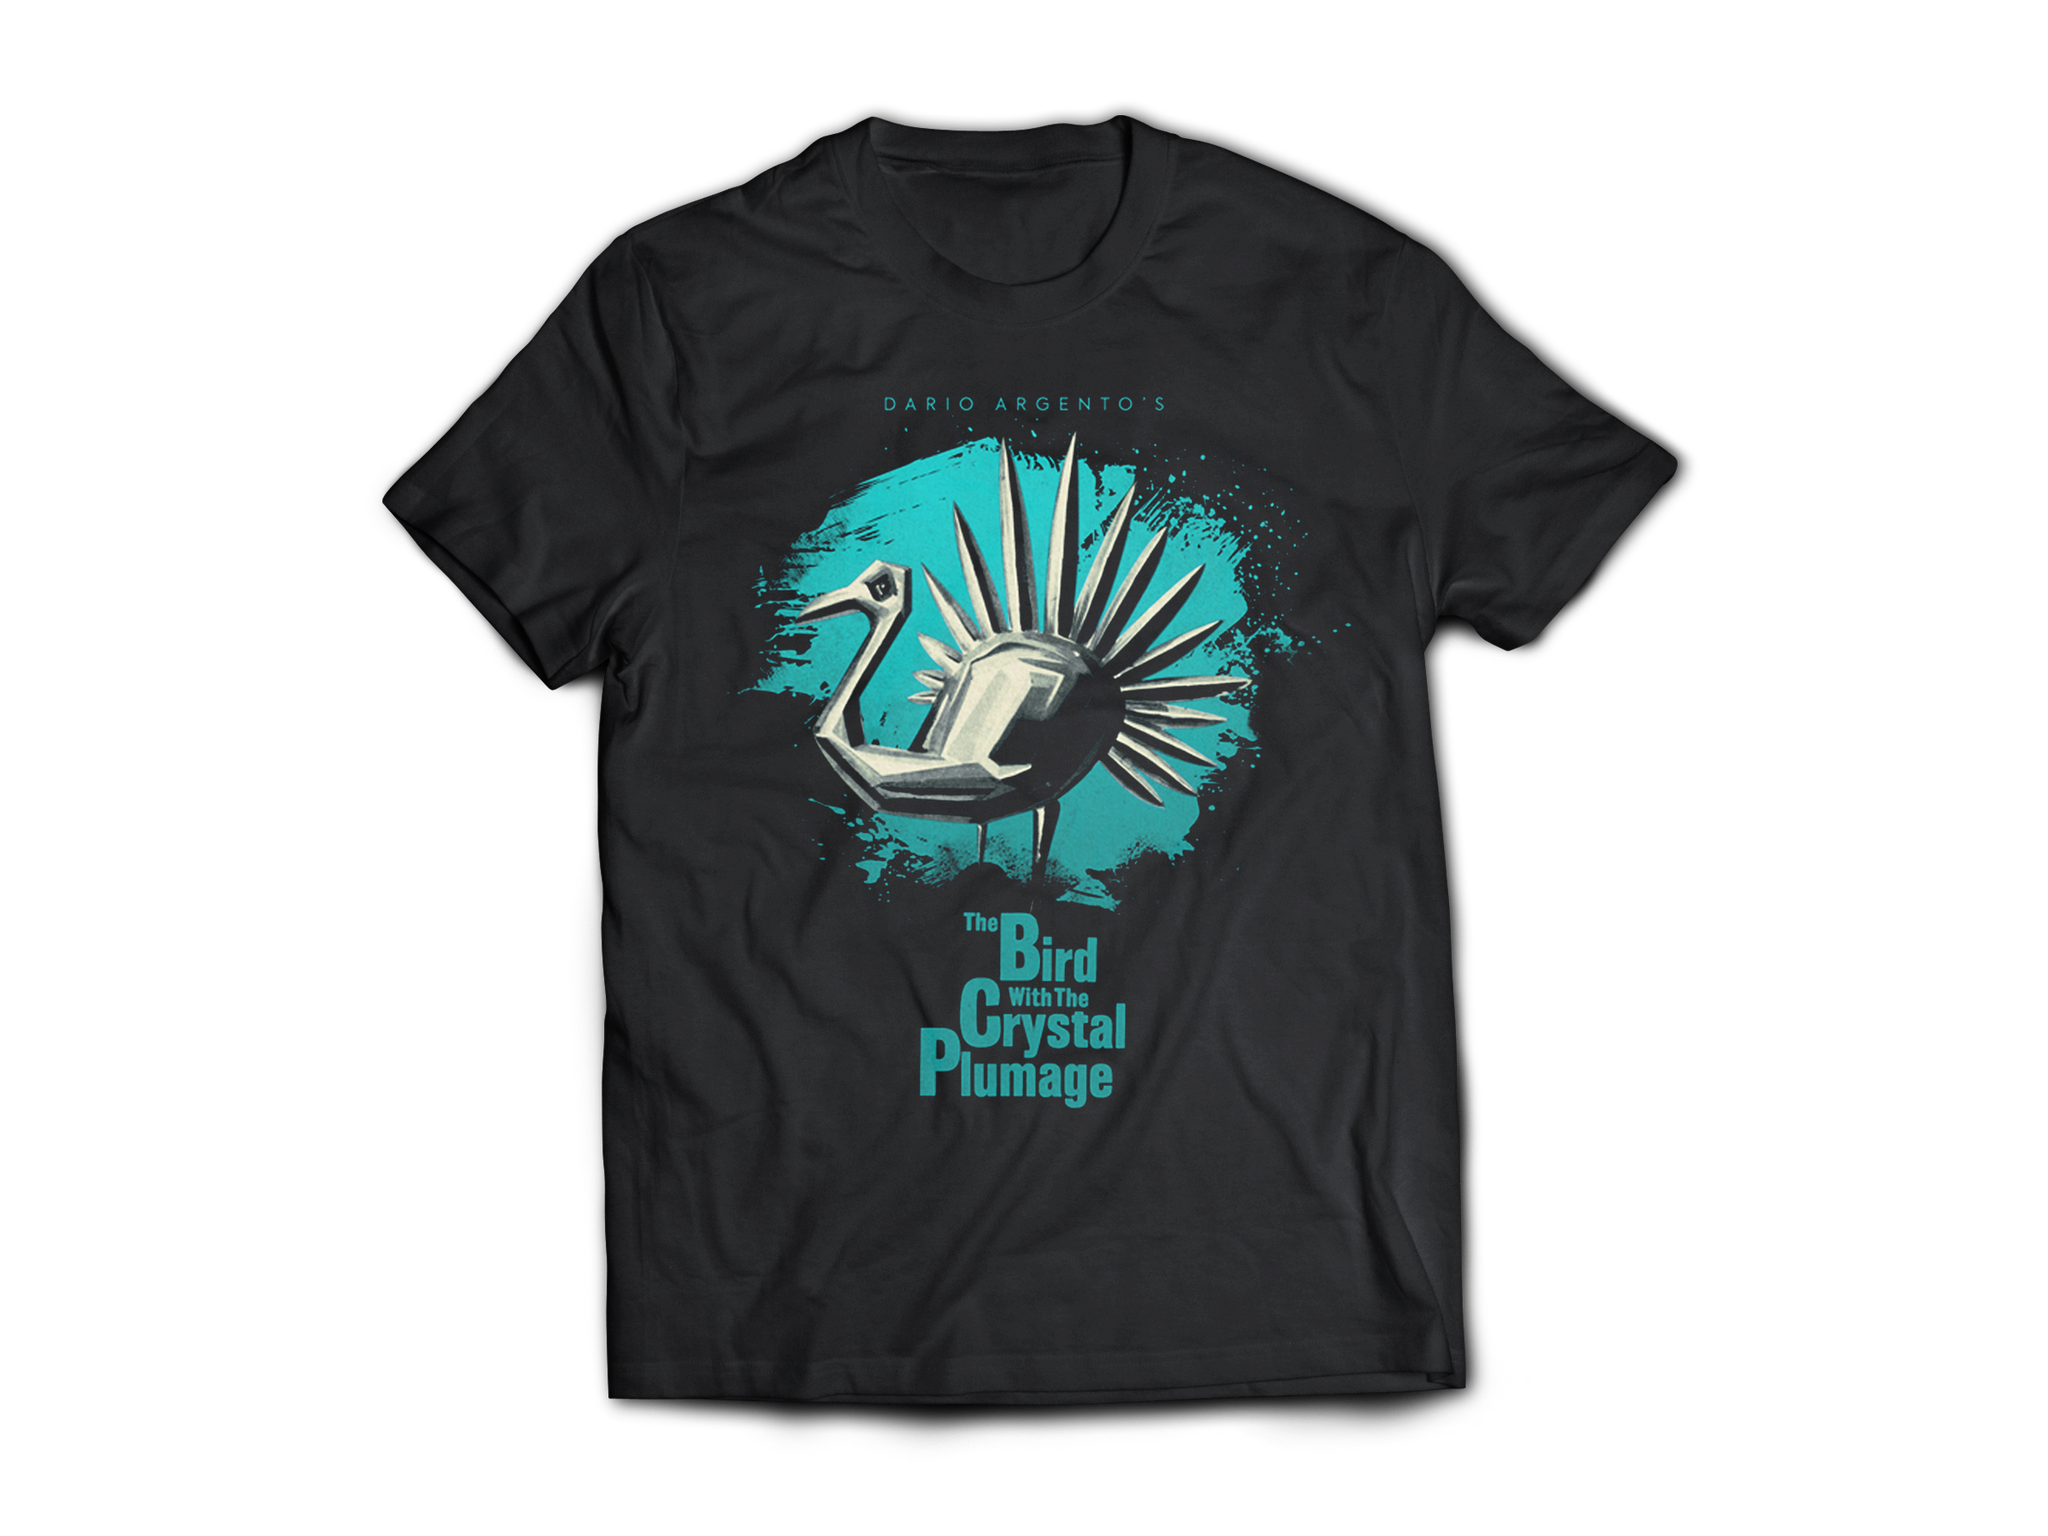 DARIO ARGENTO “BIRD WITH THE CRYSTAL PLUMAGE” LIMITED EDITION ARROW VIDEO 4K COVER T-SHIRT